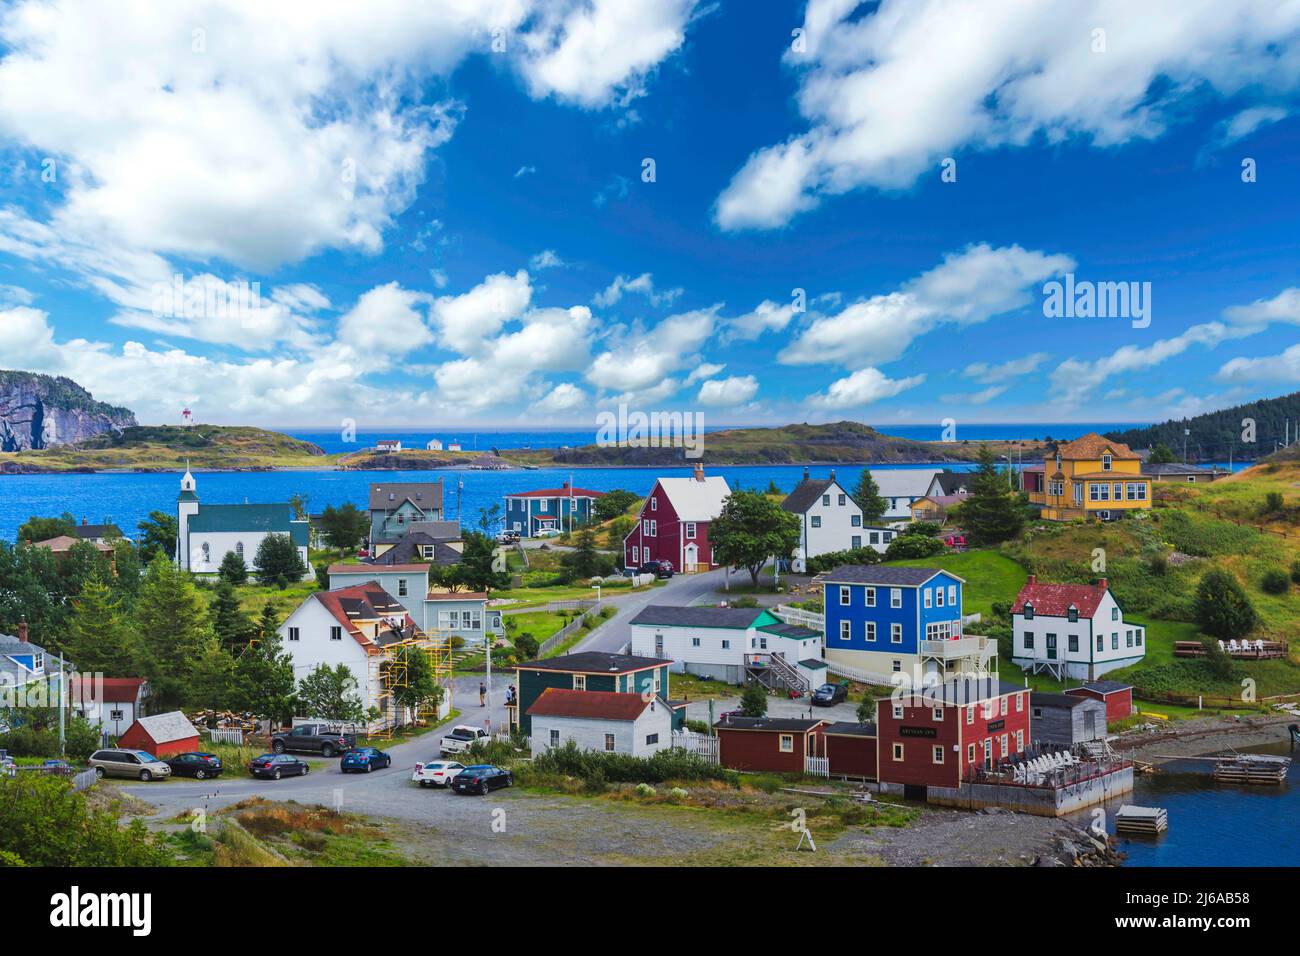 Family homes and a lighthouse in Trinity, Newfoundland Trinity, Newfoundland Ago 2021 Stock Photo